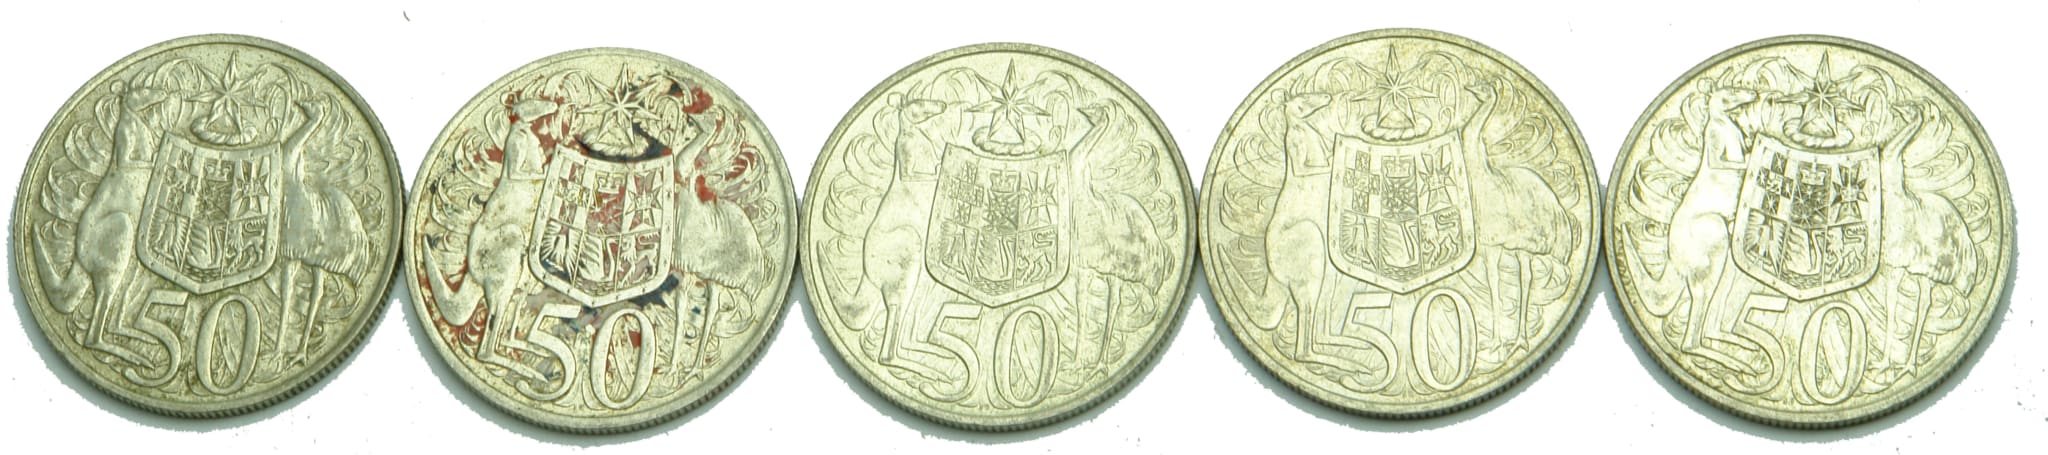 1966 Fifty Cent Pieces